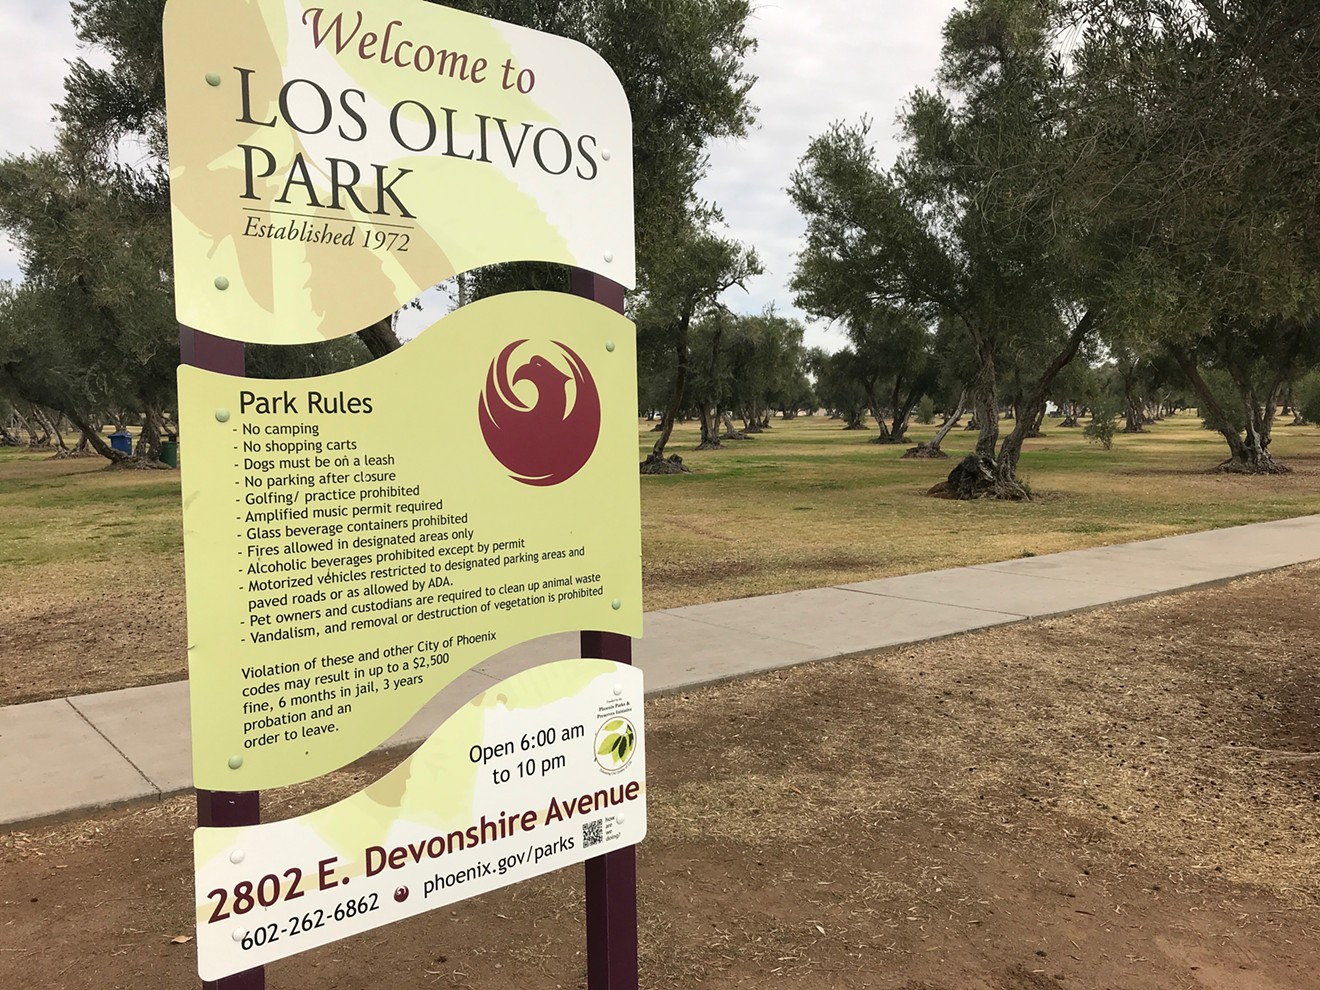 Welcome sign at Los Olivos Park in Phoenix.